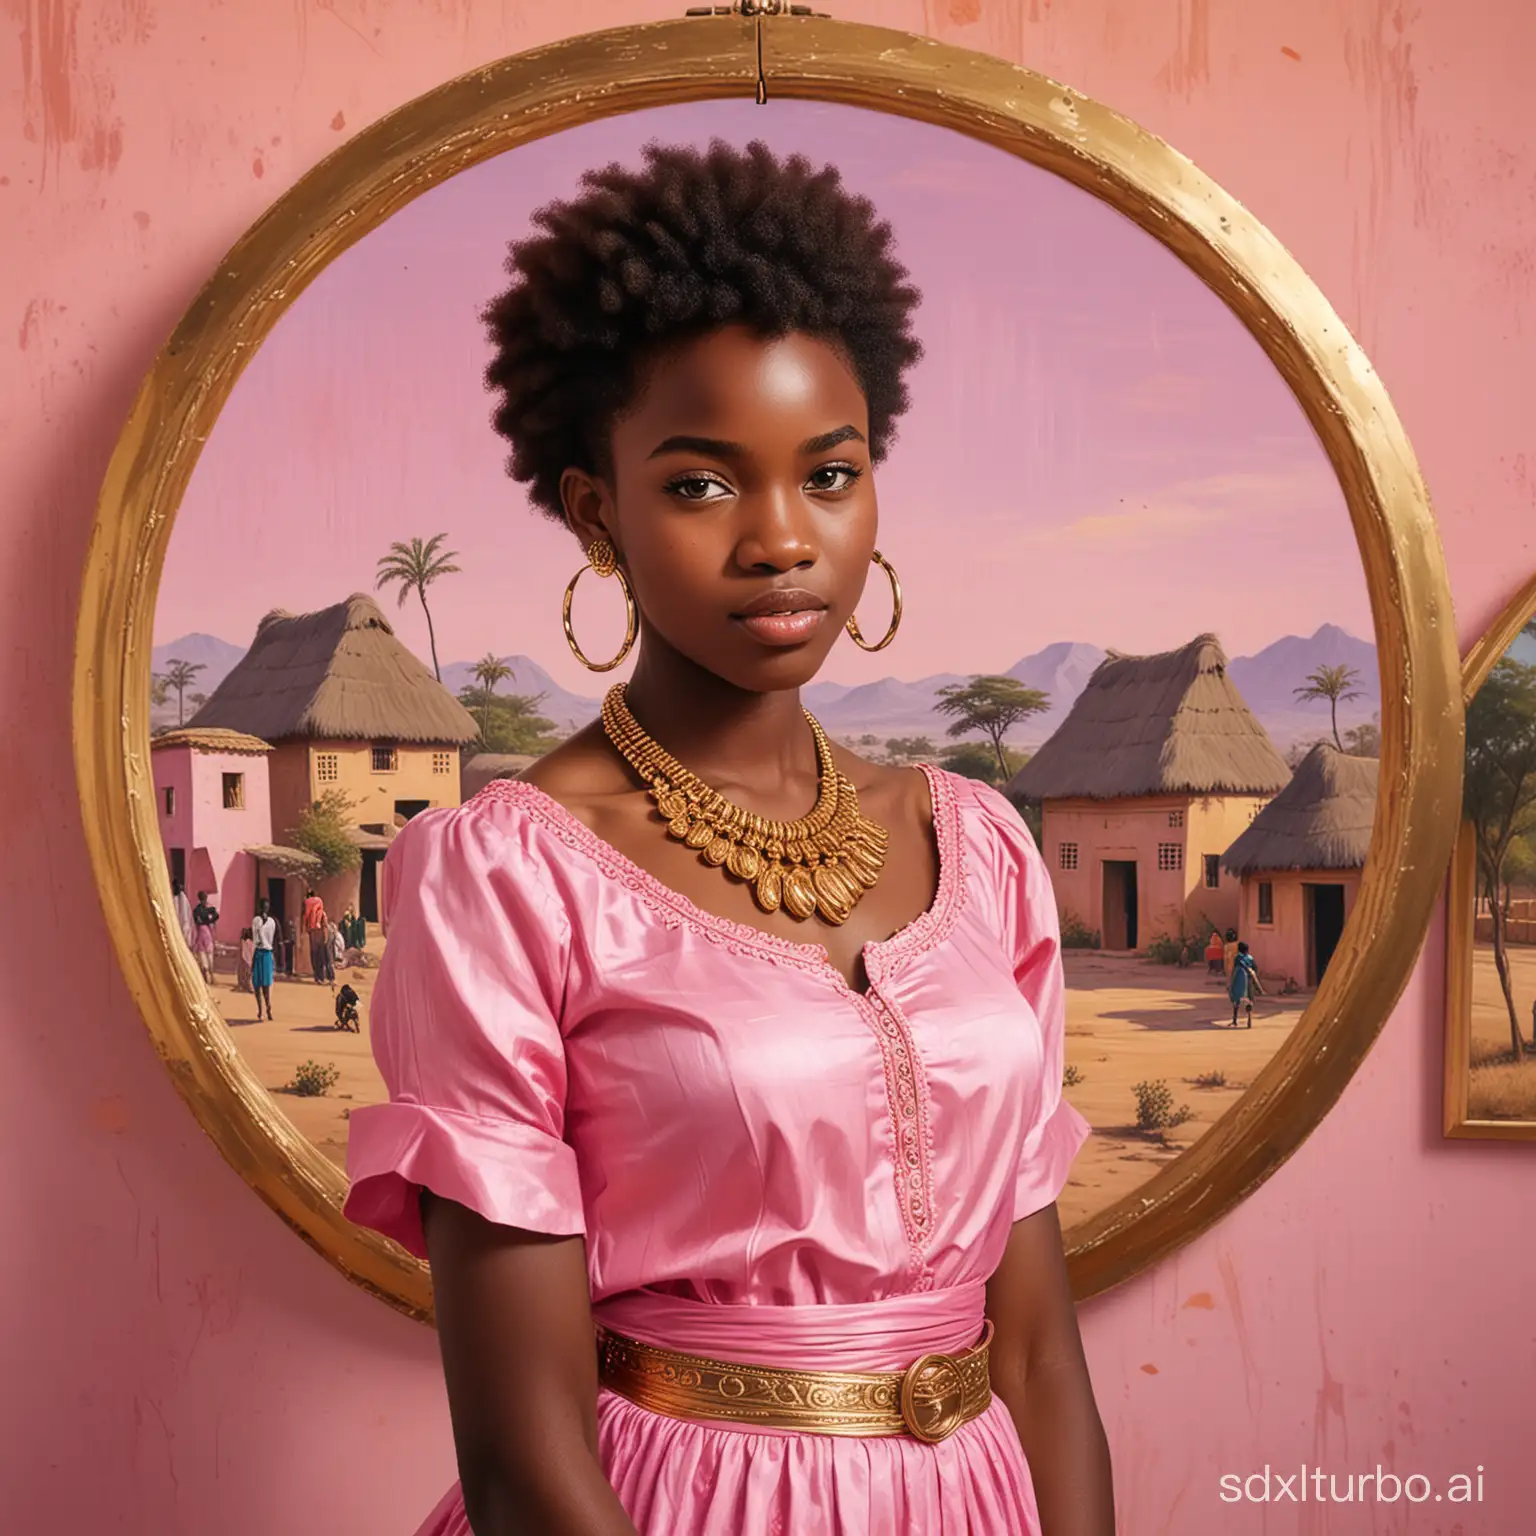  a painting in a museum of a royal African black teen with short coiled hair, long lashes, lots of rings on hands, large gold hoop earrings and a gold african necklace, pink African dress, playful expression, the painting has a African village background, concept art